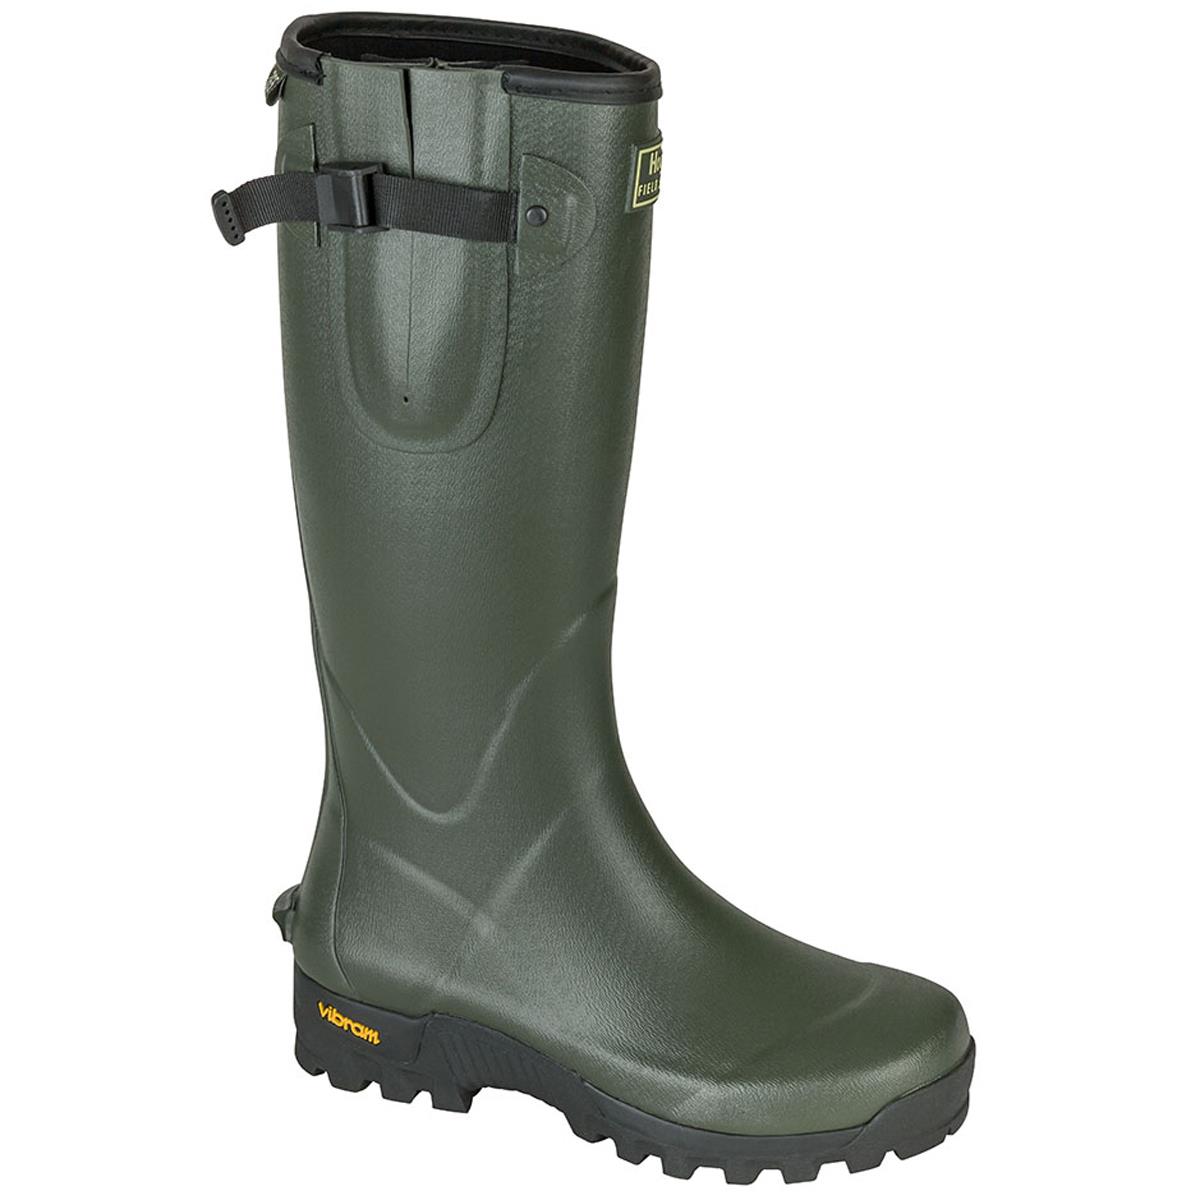 Do these Hoggs of Fife Field Sport boots have a wide fit?